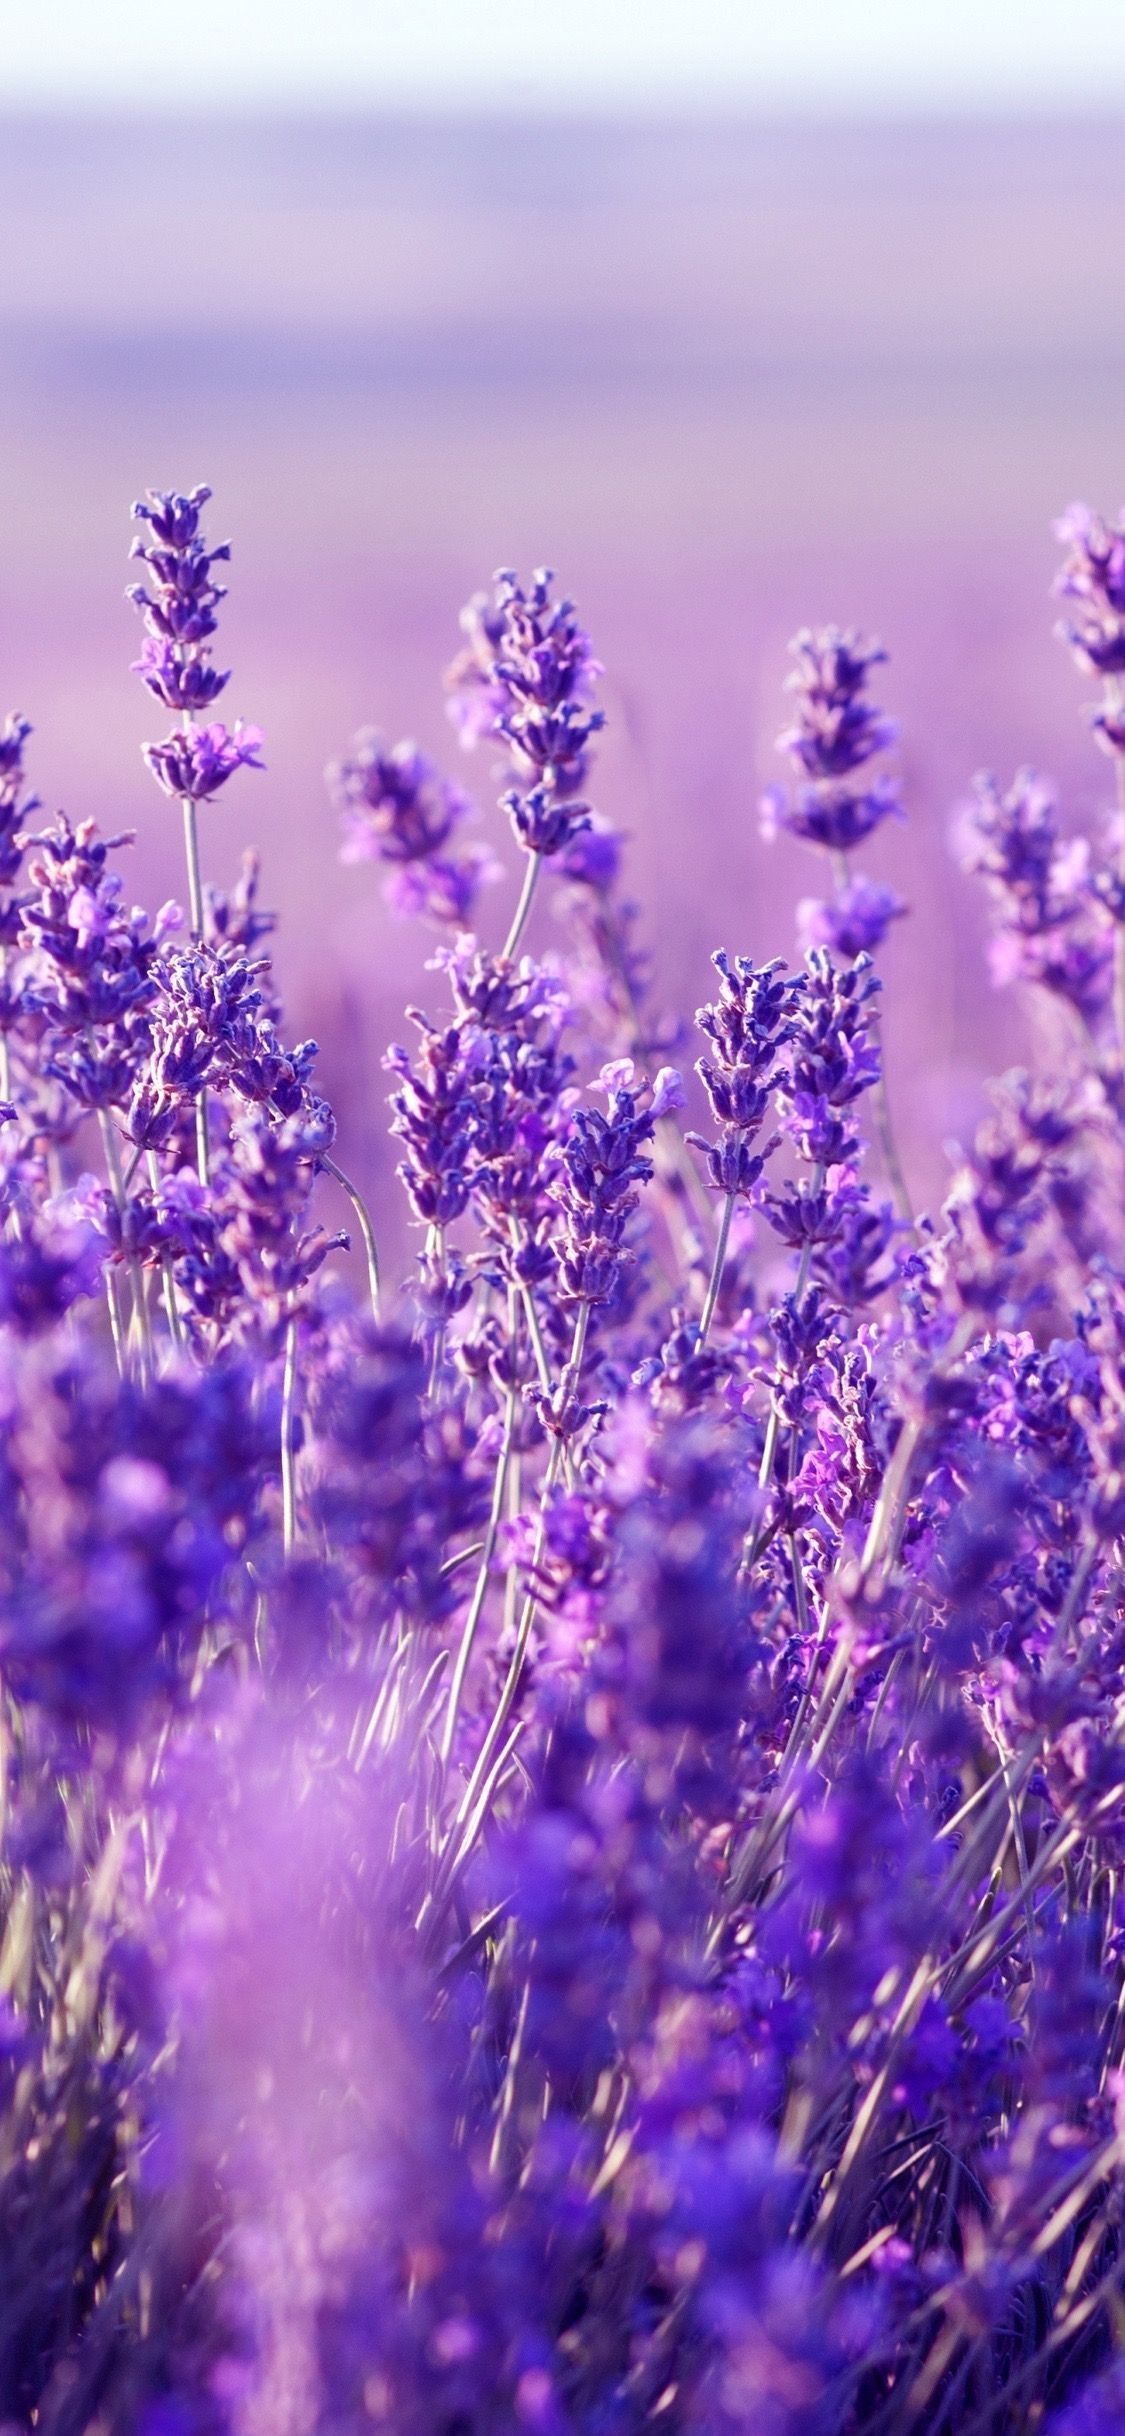 Lavender fields in the countryside - Lavender